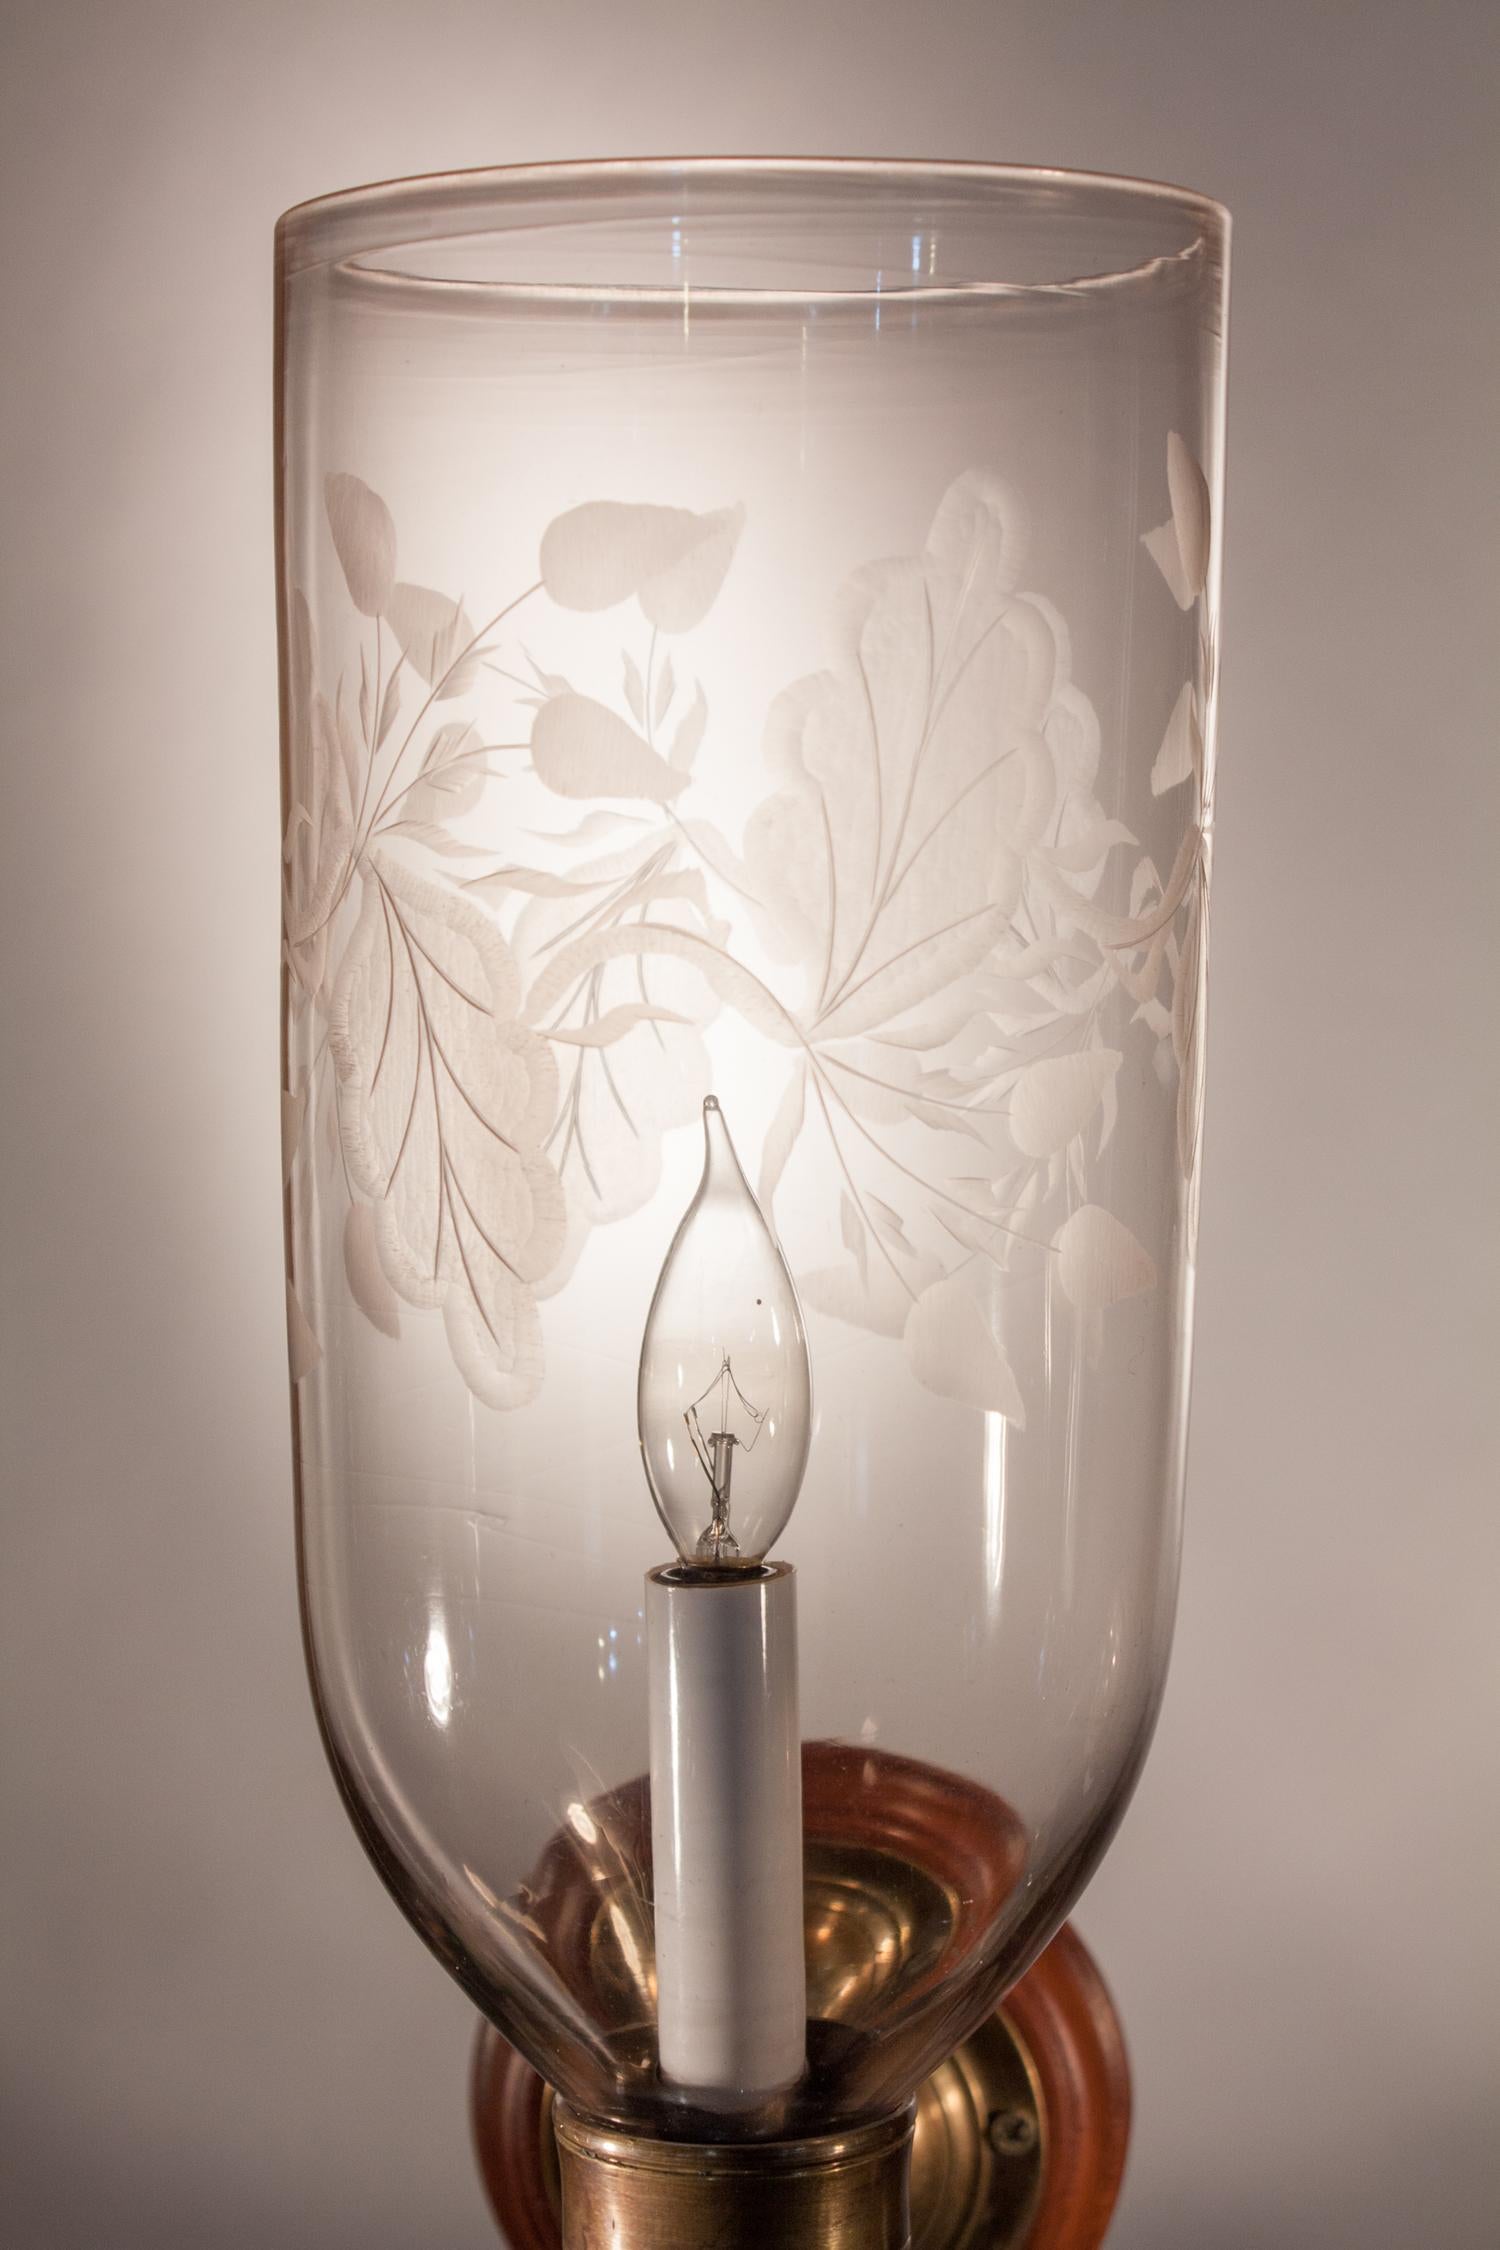 Etched Pair of Hurricane Shade Wall Sconces with Frosted Leaf Etching